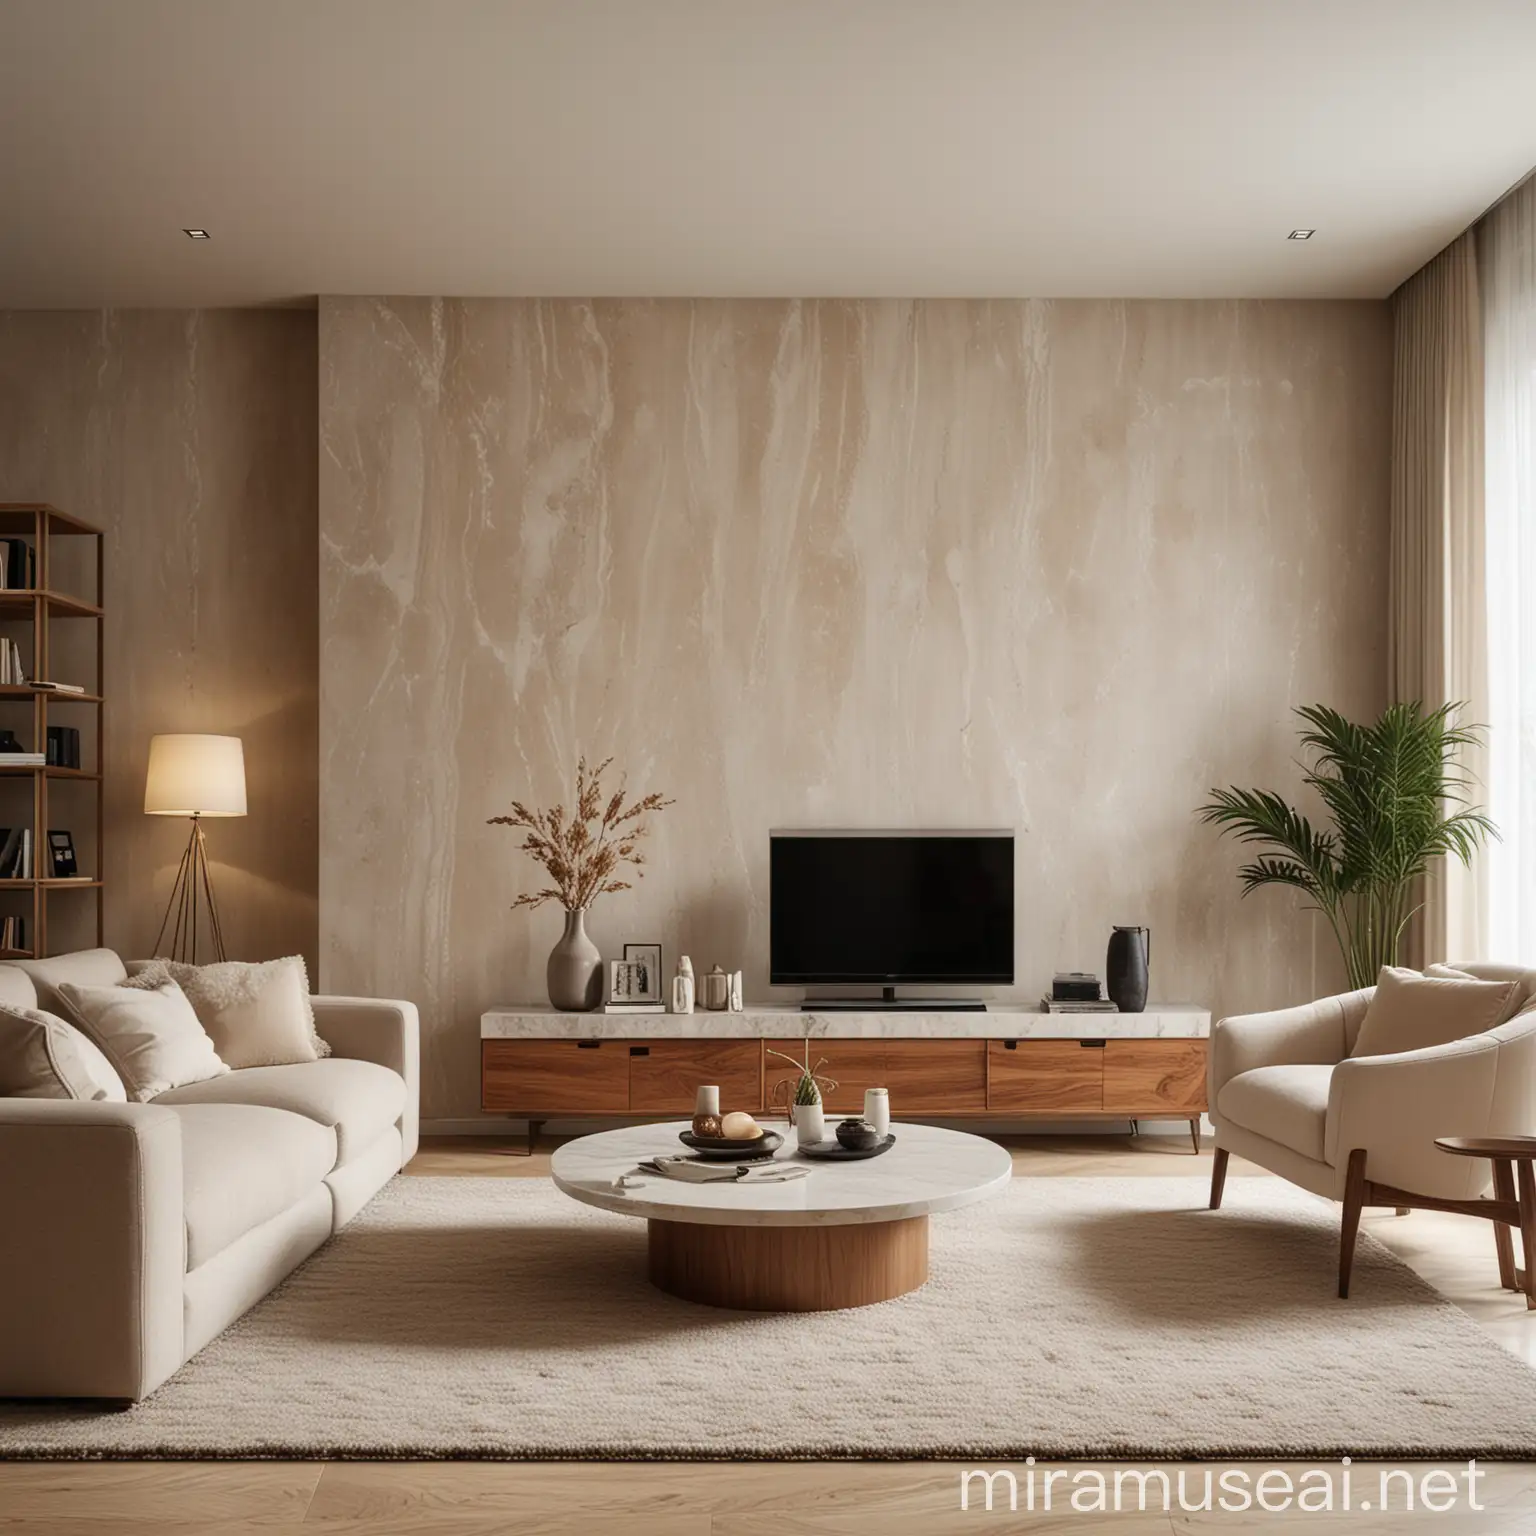 An ultra-realistic wide-angle image of a large luxury contemporary living room, with plush rugs, sofa with boucle fabric, beige armchairs, a neutral colour scheme of whites, greys, beige, tan, coffee, soft Nordic modern lamb sofa, accent chairs, marble coffee table, an aesthetic marble TV wall with walnut shelves decorated with Nordic vases, faux books, pampas vase, with LED lights, a Nordic contemporary lamp, and minimalist decor.